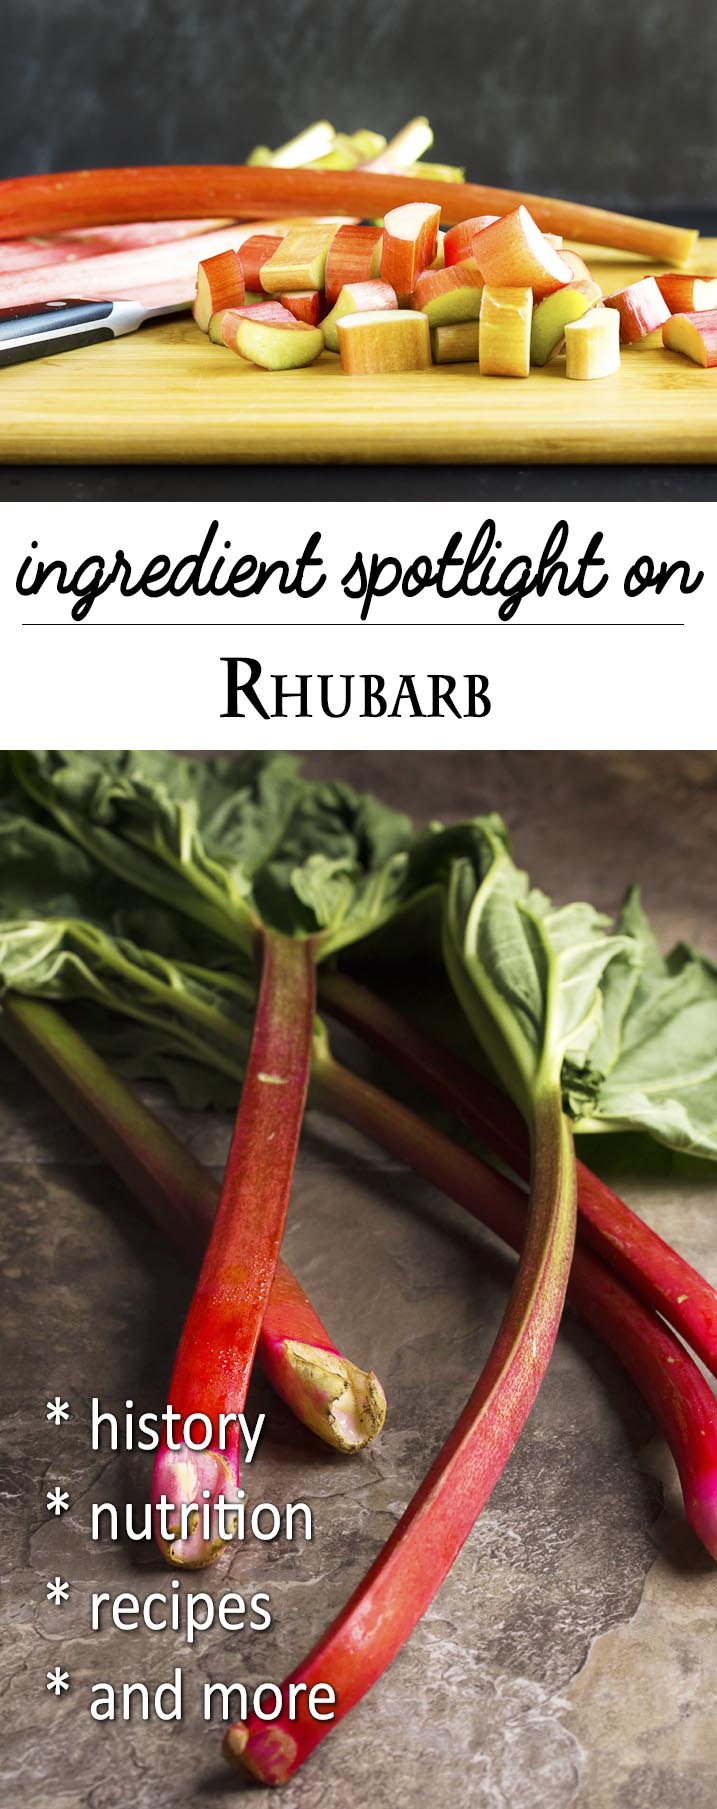 Ingredient Spotlight: Rhubarb - With its deep, red stalks and intensely sour and puckery flavor, rhubarb is great in desserts as well as in stews and savory sauces. If all you know is strawberry rhubarb pie, you'll be impressed by rhubarb's versatility. | justalittlebitofbacon.com